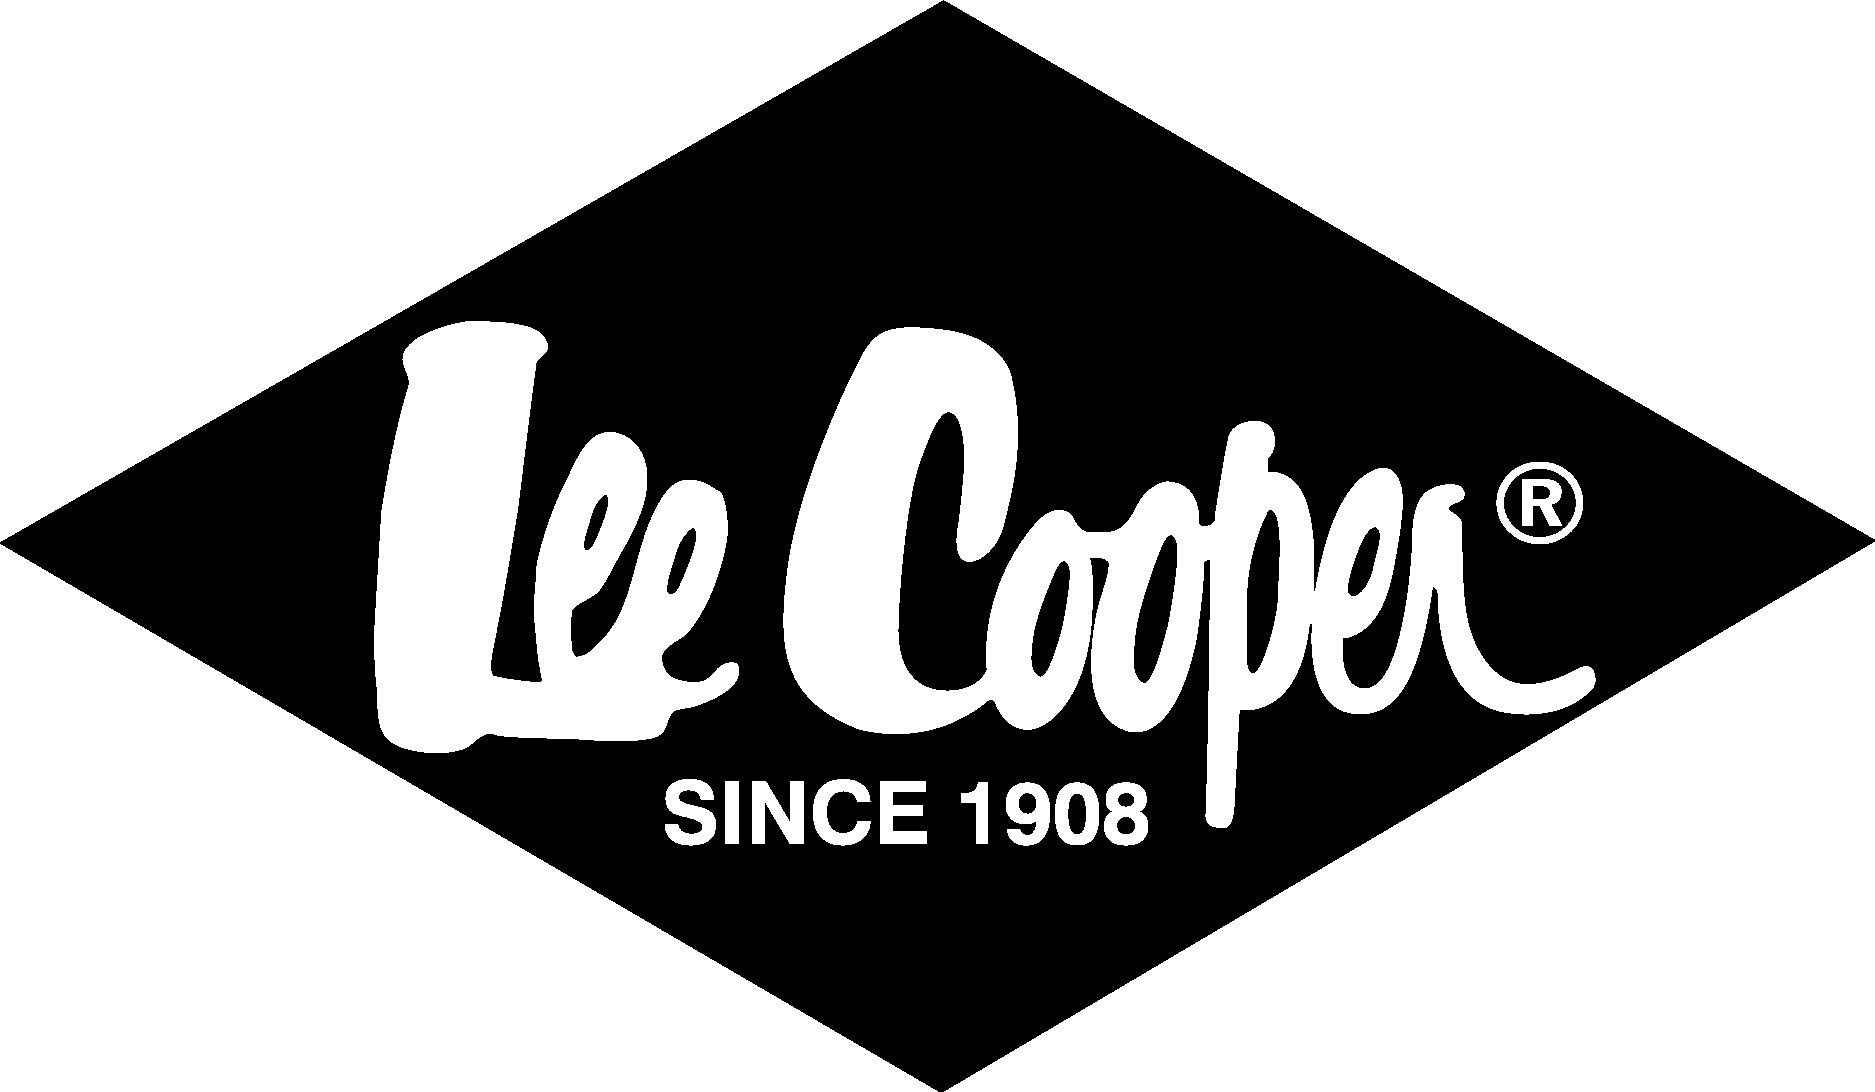 Lee Cooper Straight jeans Unboxing - YouTube